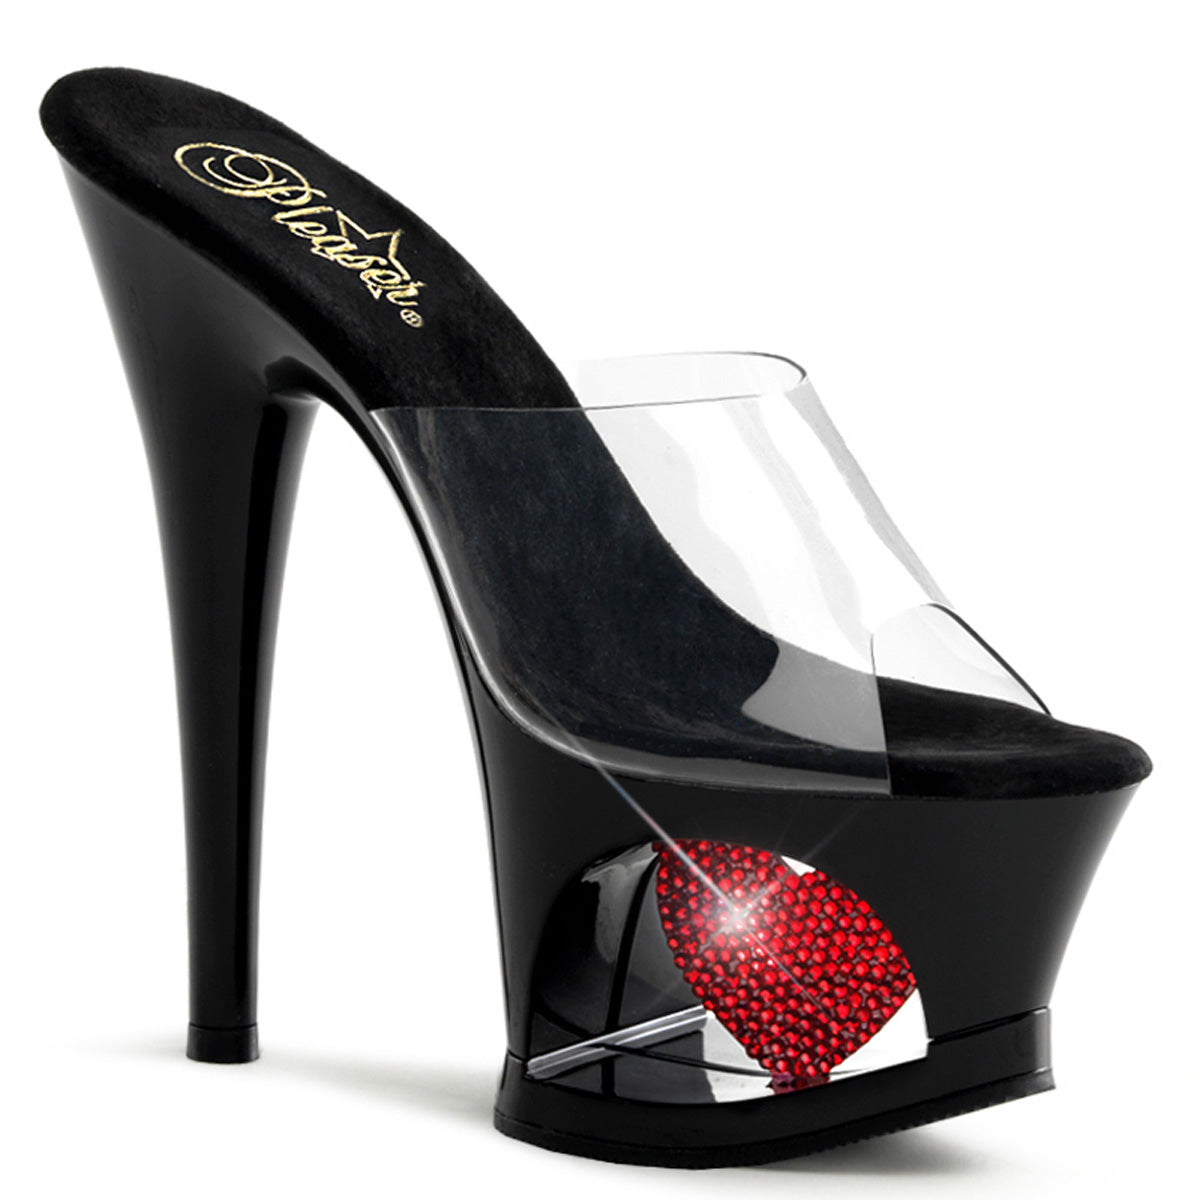 MOON-701HRS 7" Heel ClearBlack with Red Pole Dancing Shoes-Pleaser- Sexy Shoes